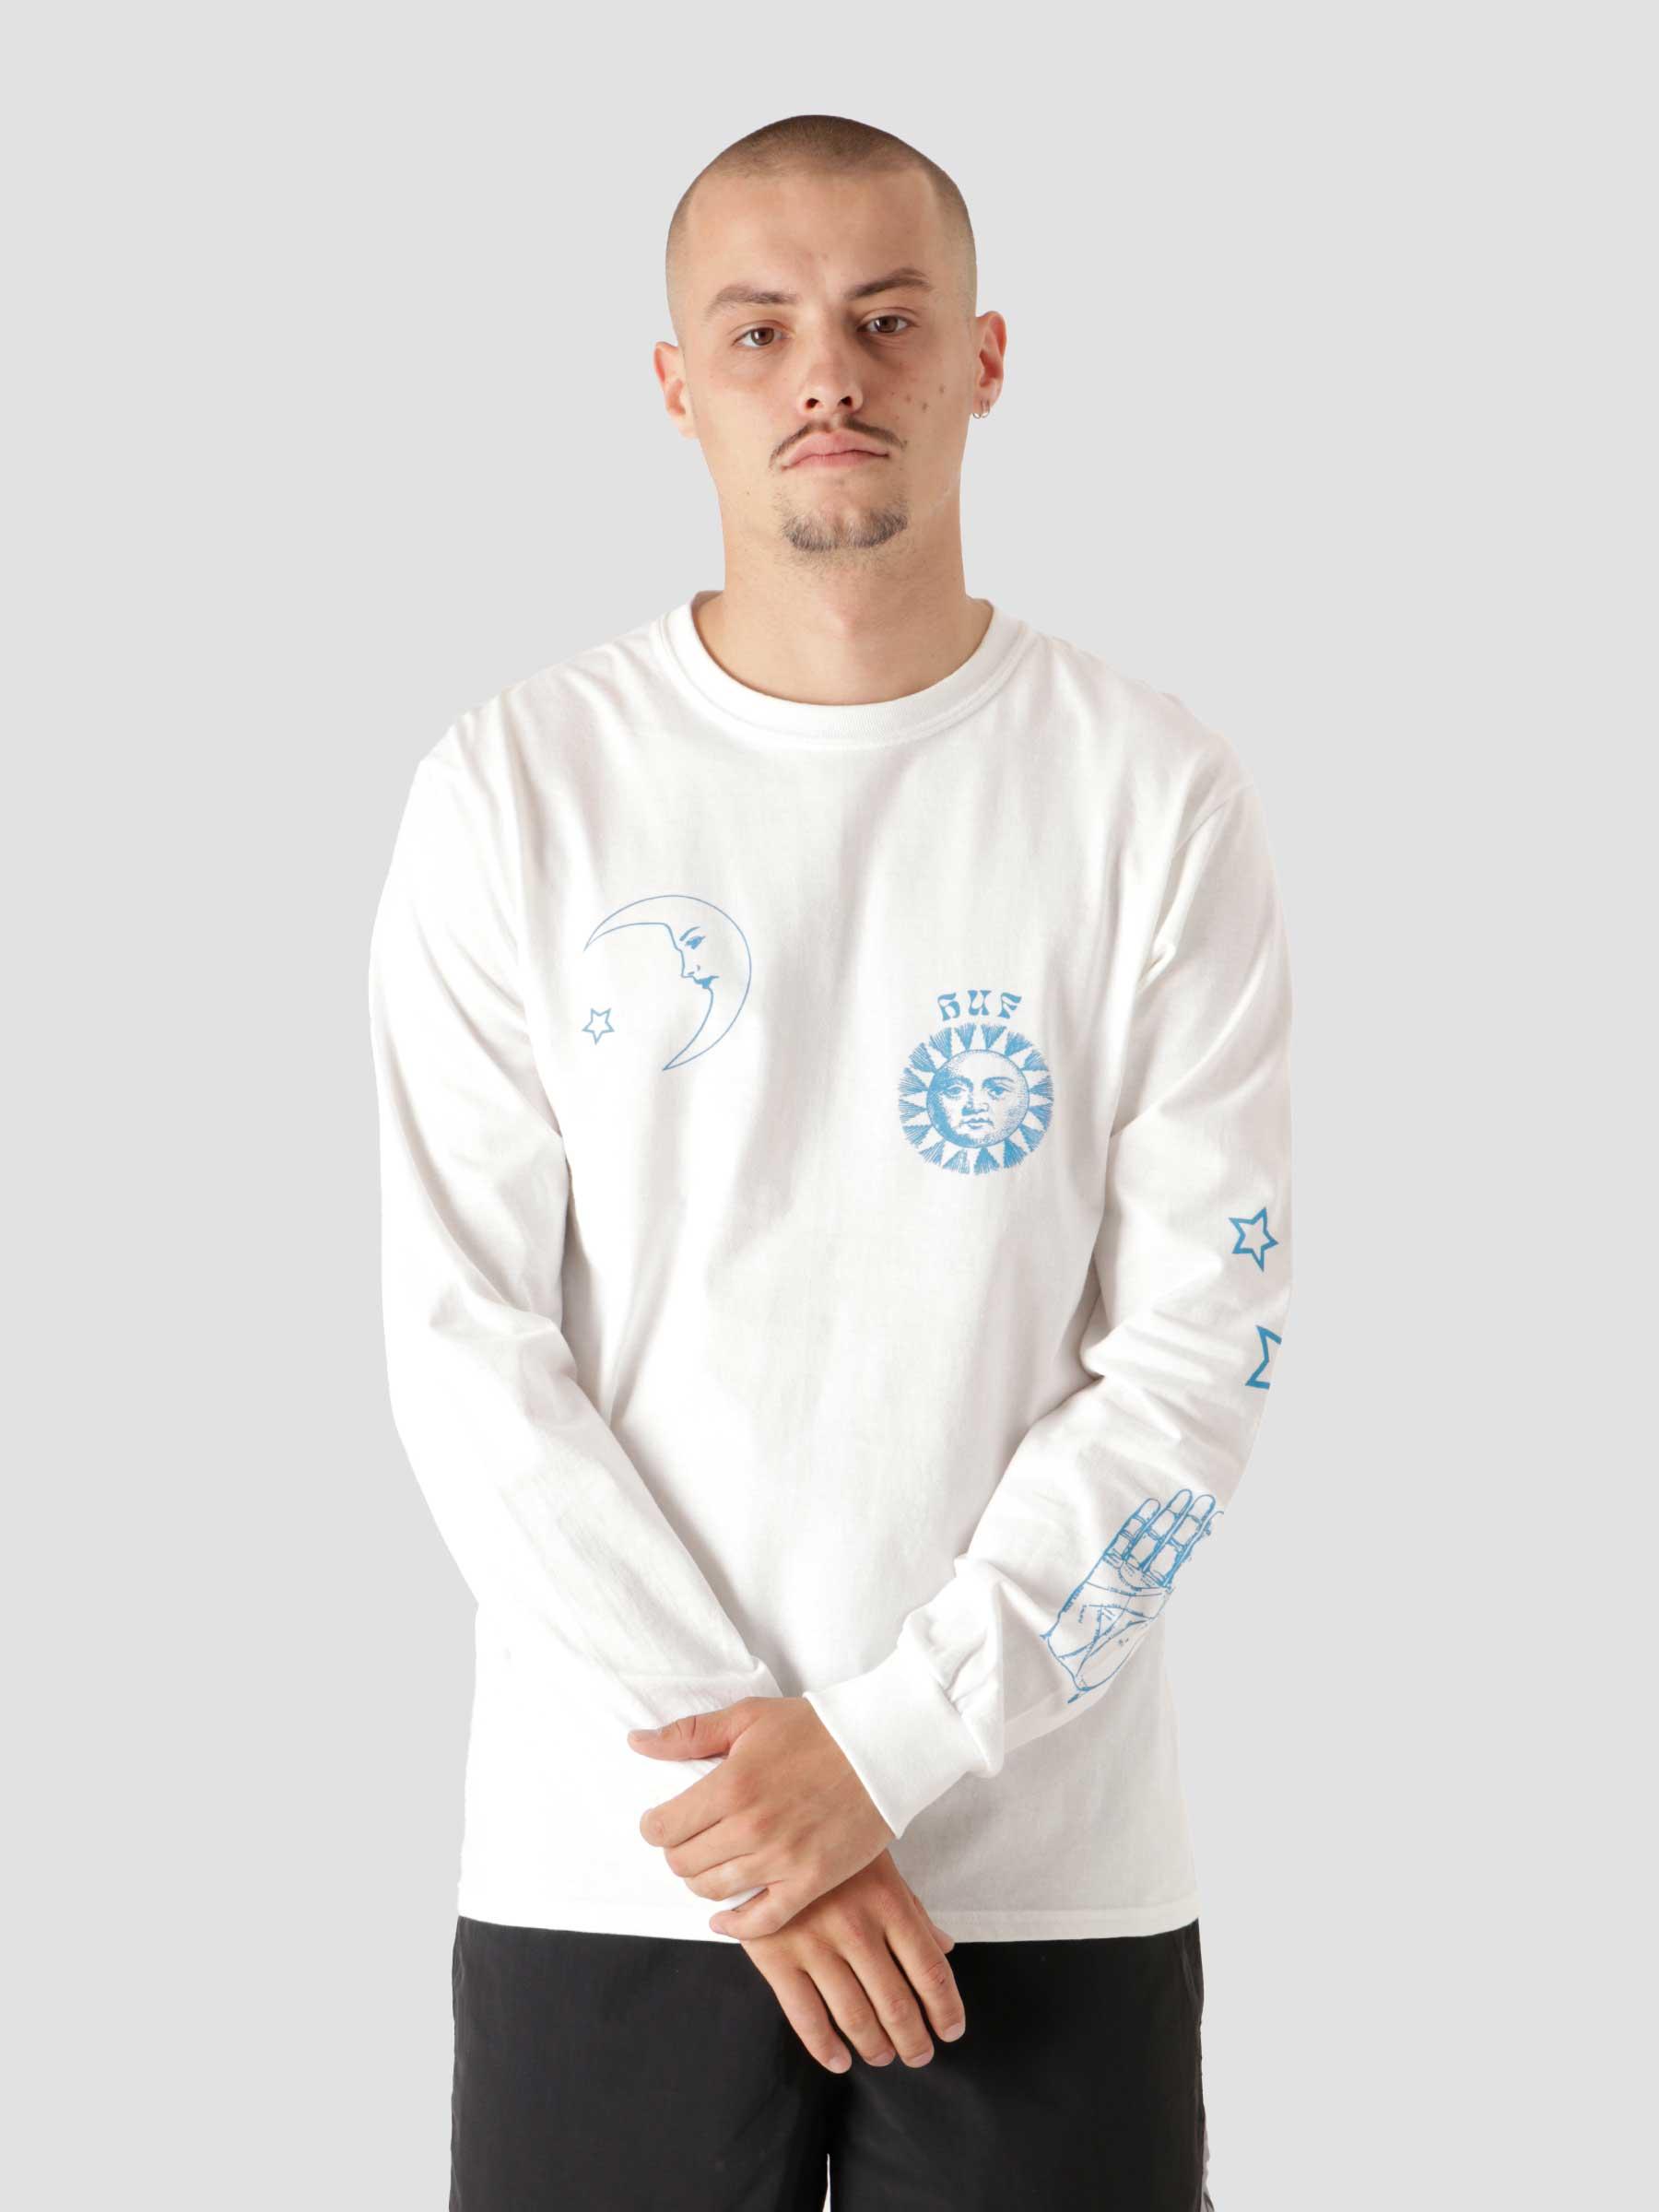 Gratefully Yours L/S Tee White TS01477